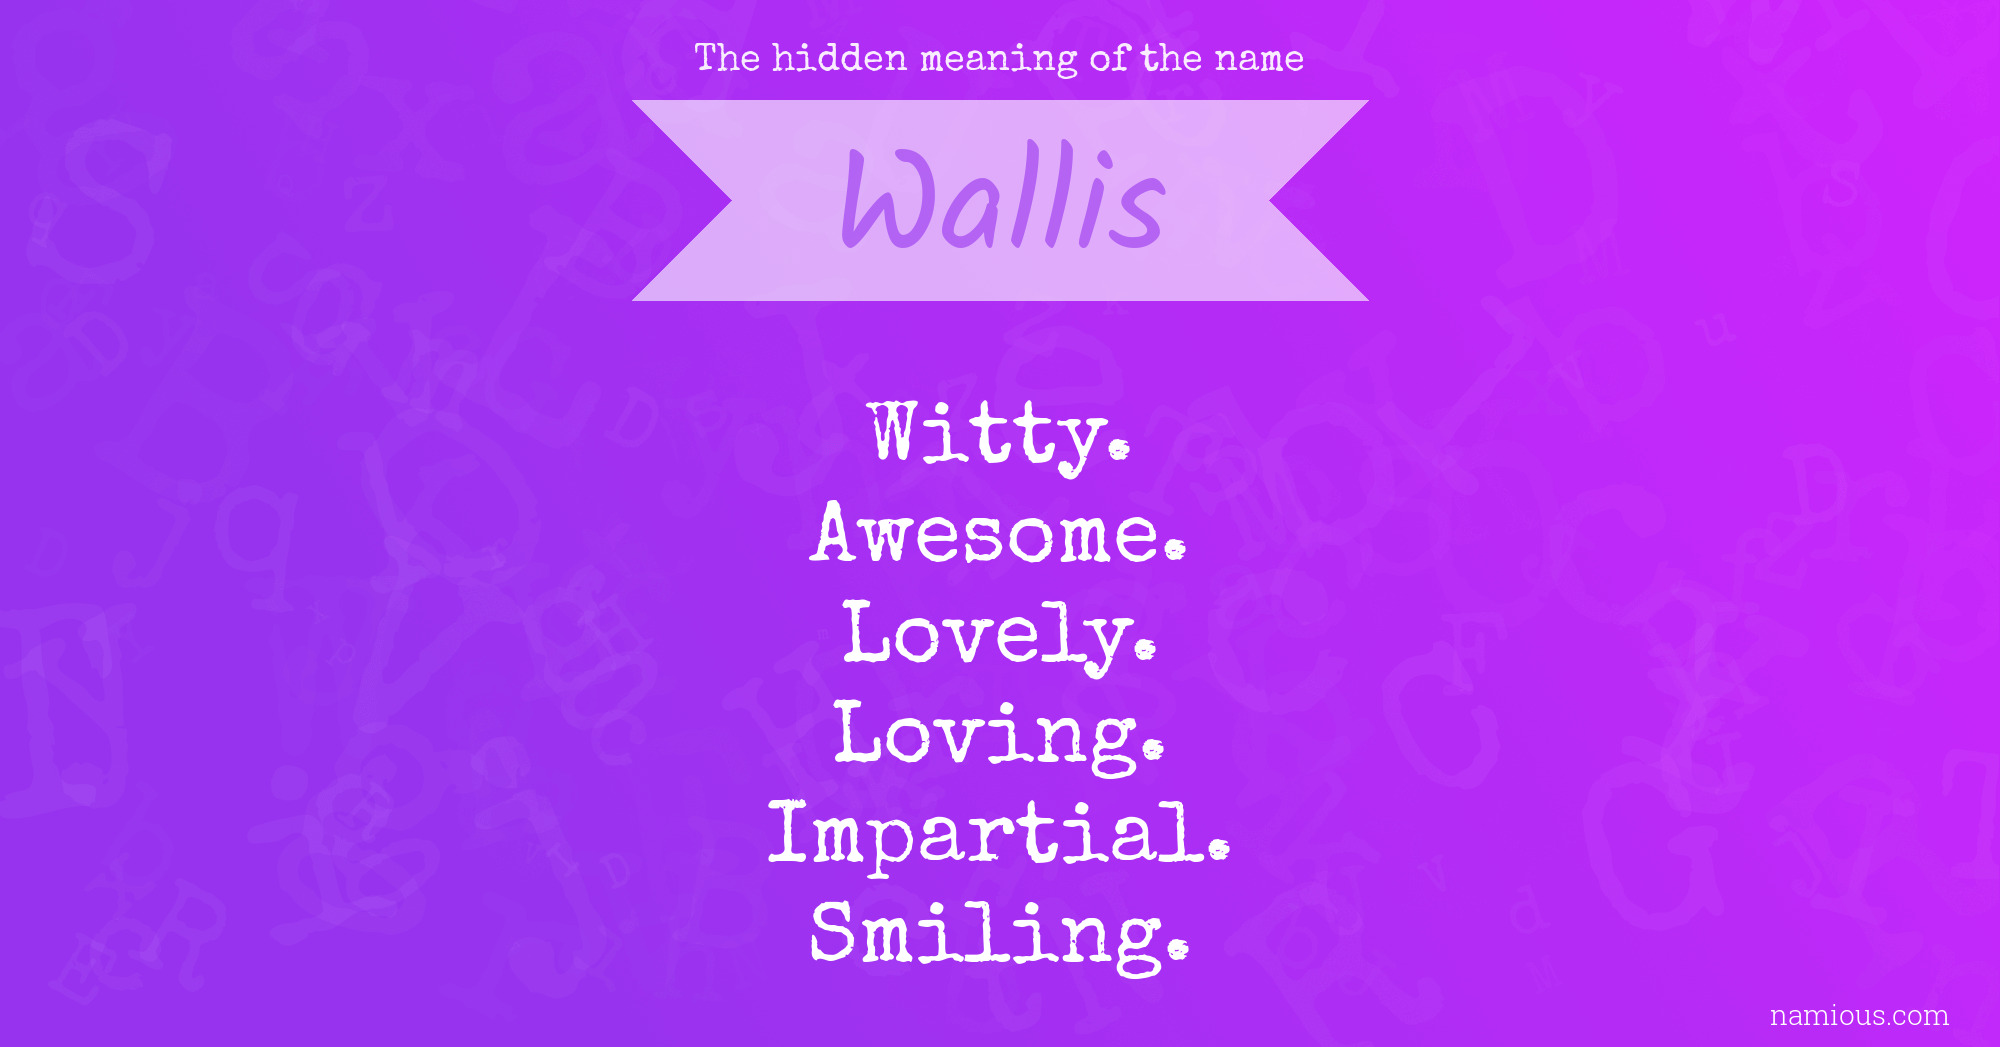 The hidden meaning of the name Wallis